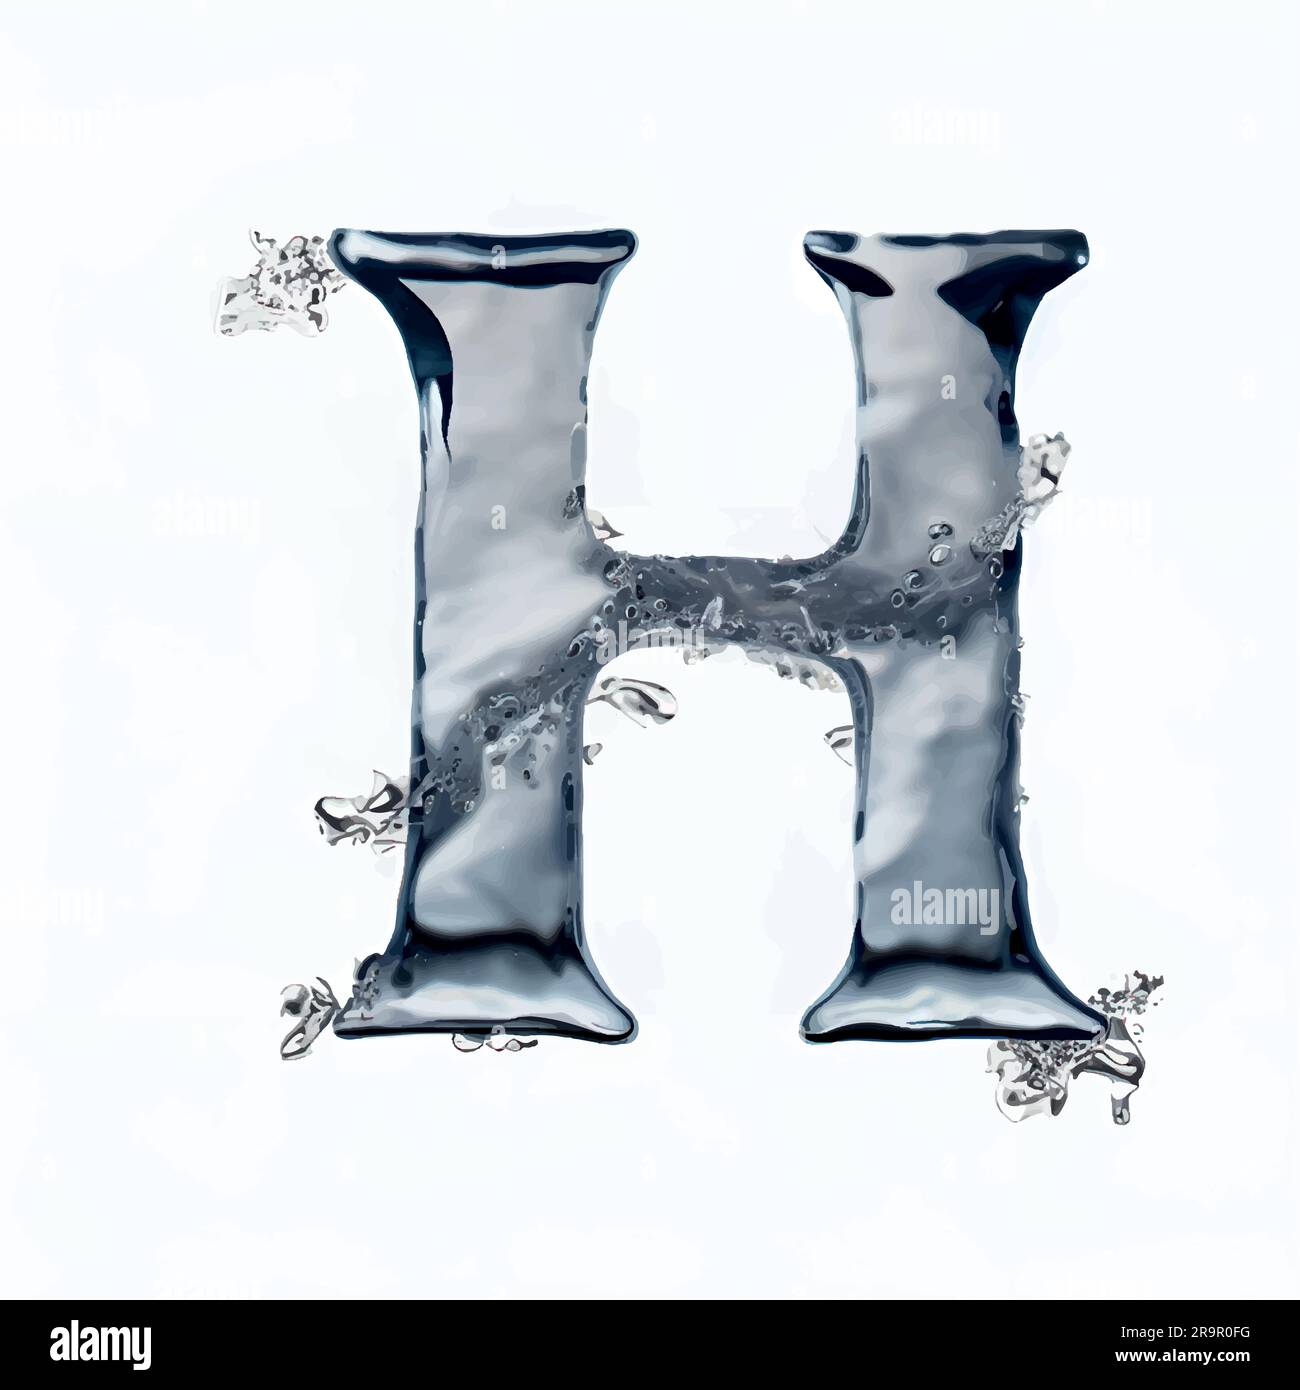 capital letter H in water with blank image background Stock Vector